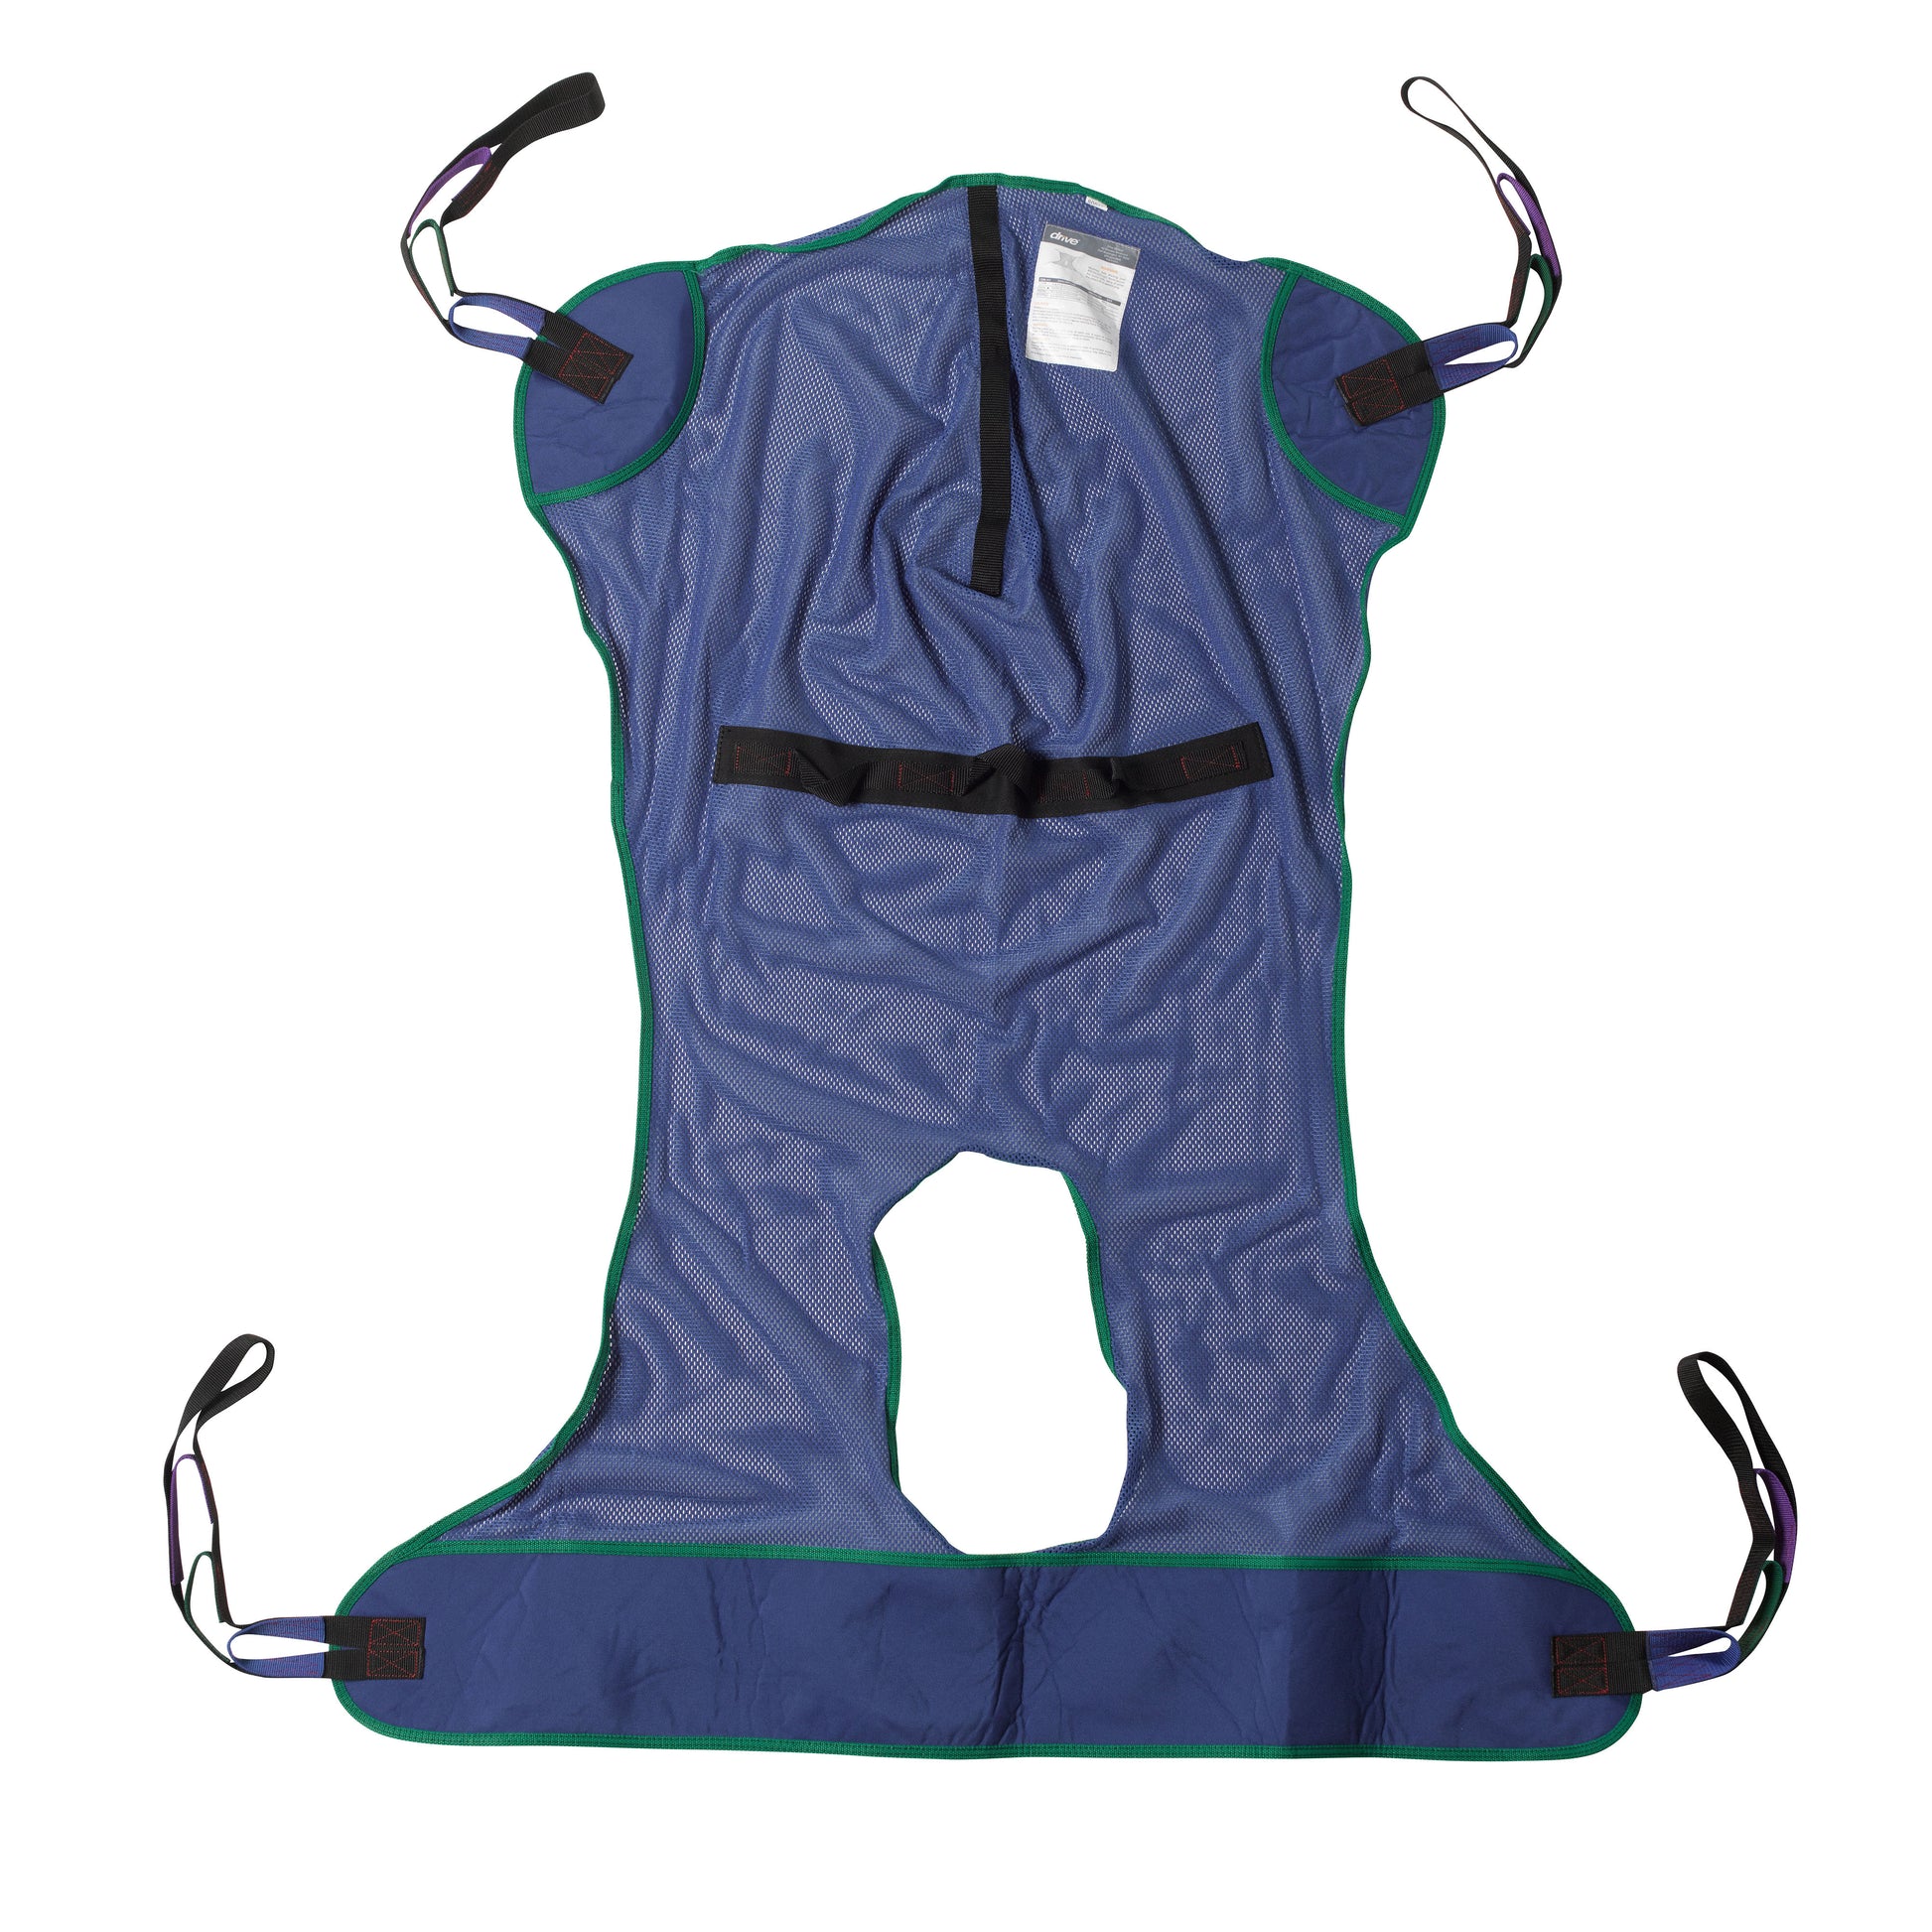 Drive Medical 13221M Full Body Patient Lift Sling, Mesh with Commode Cutout, Medium